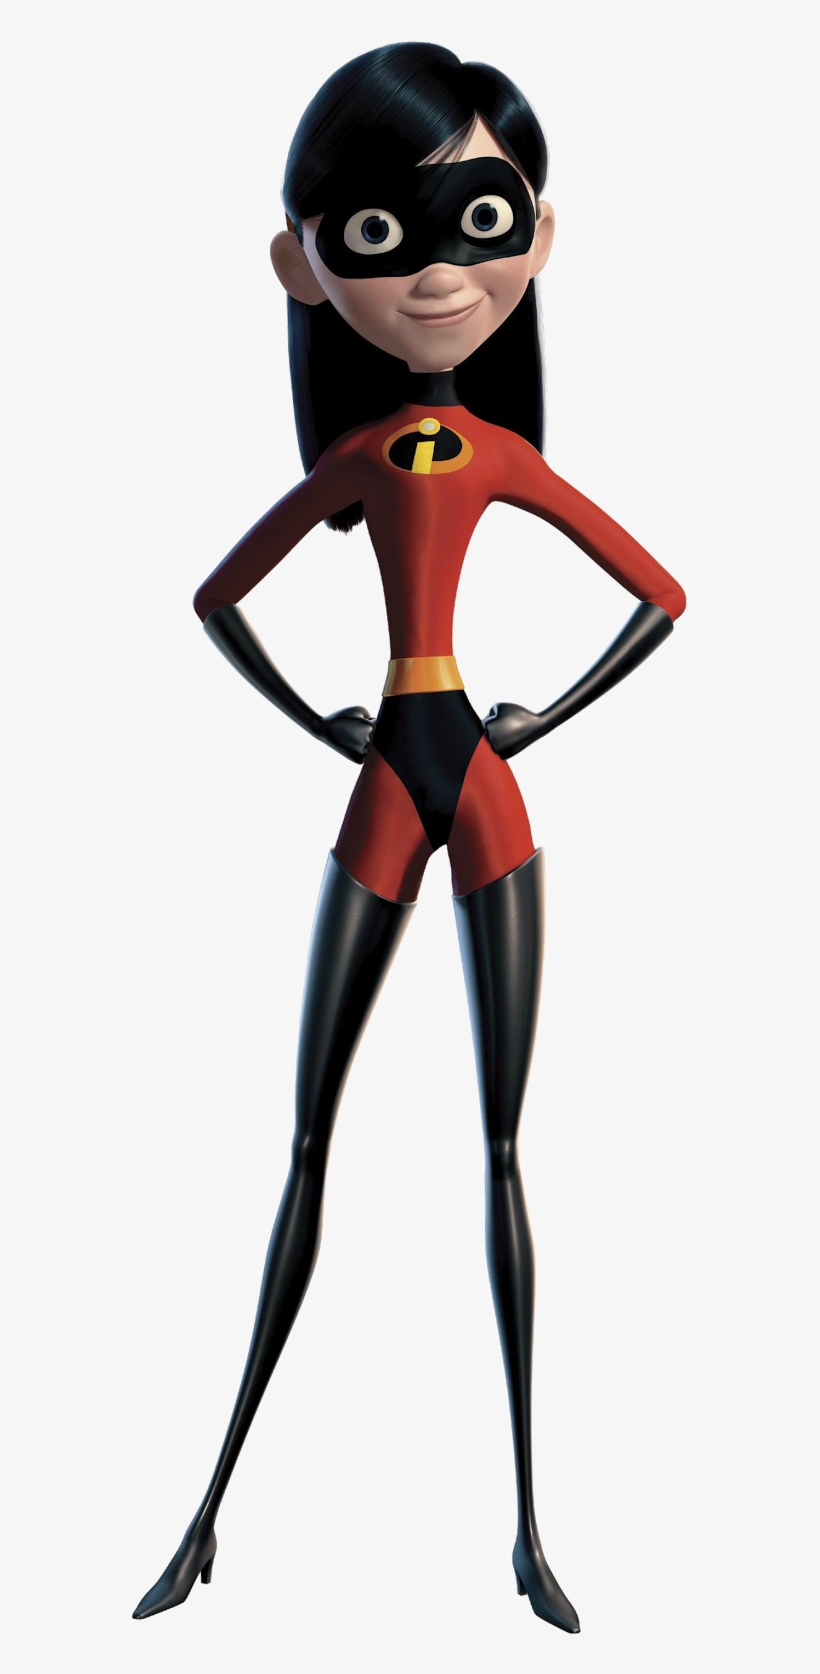 Png Os Incríveis - Violet From The Incredibles, transparent png #2642904